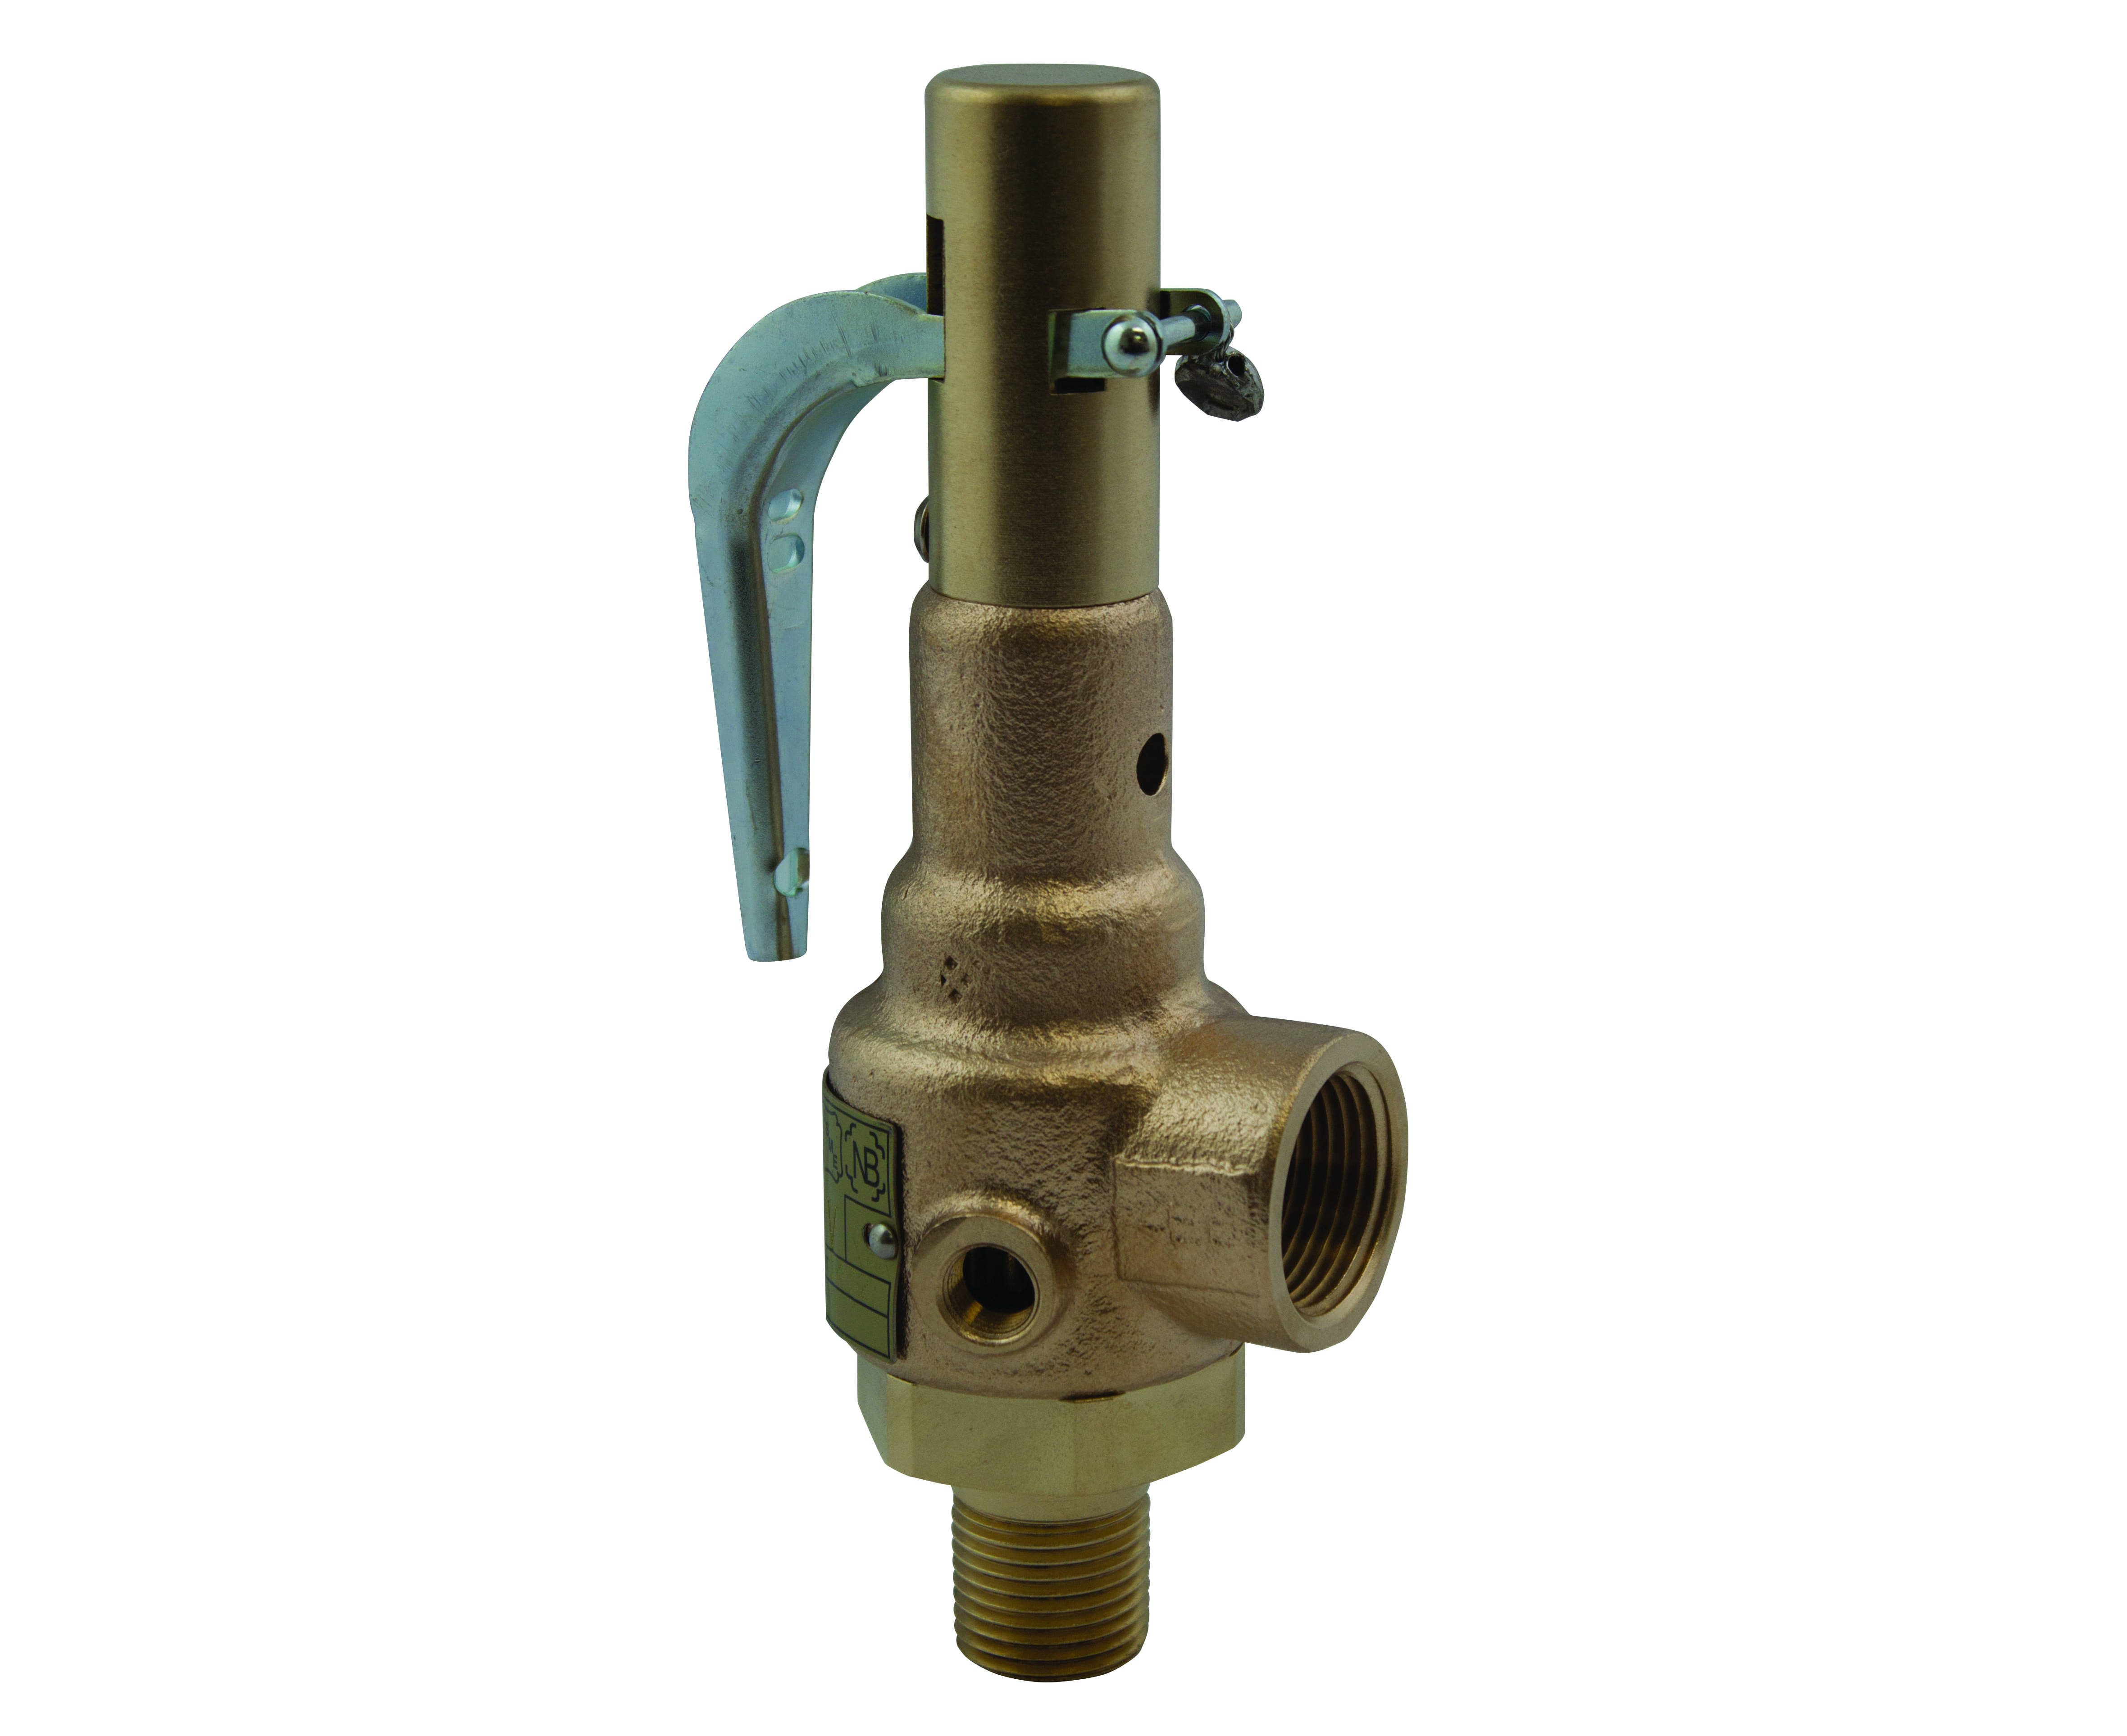 Preview image for Apollo ASME Sec VIII Steam Bronze Safety Relief Valves with Brass Trim, Teflon Seat, CE/PED Compliant, 1-1/4" (MNPT x FNPT)